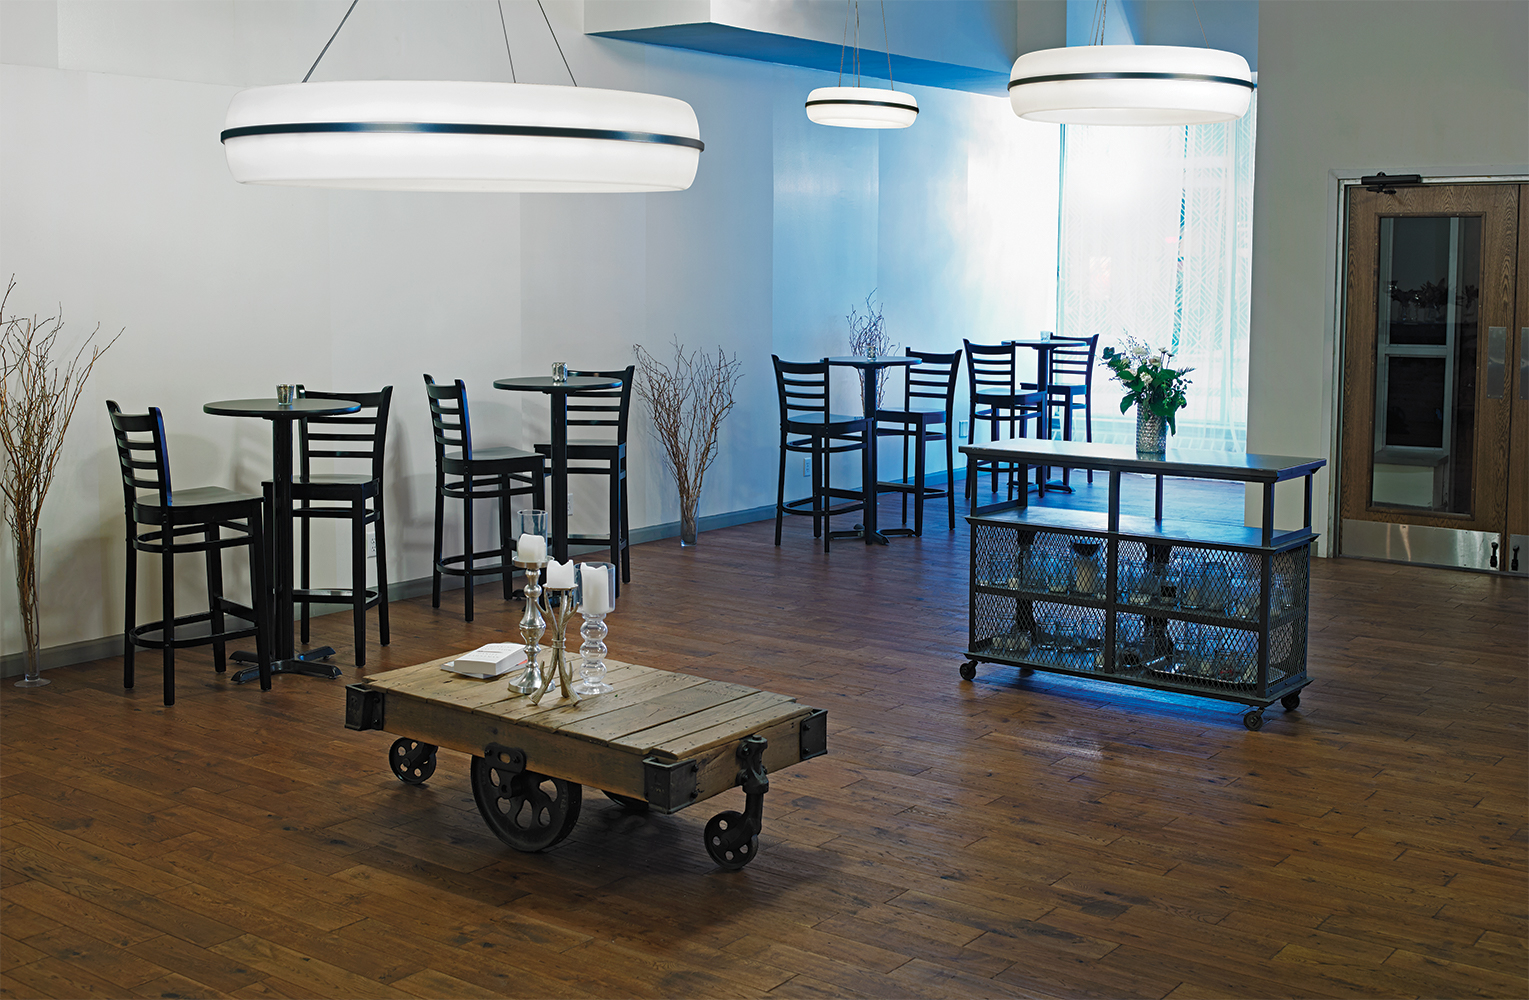 Meridian Round pendant is perfect for hospitality lighting, seen here above a small, modern café.